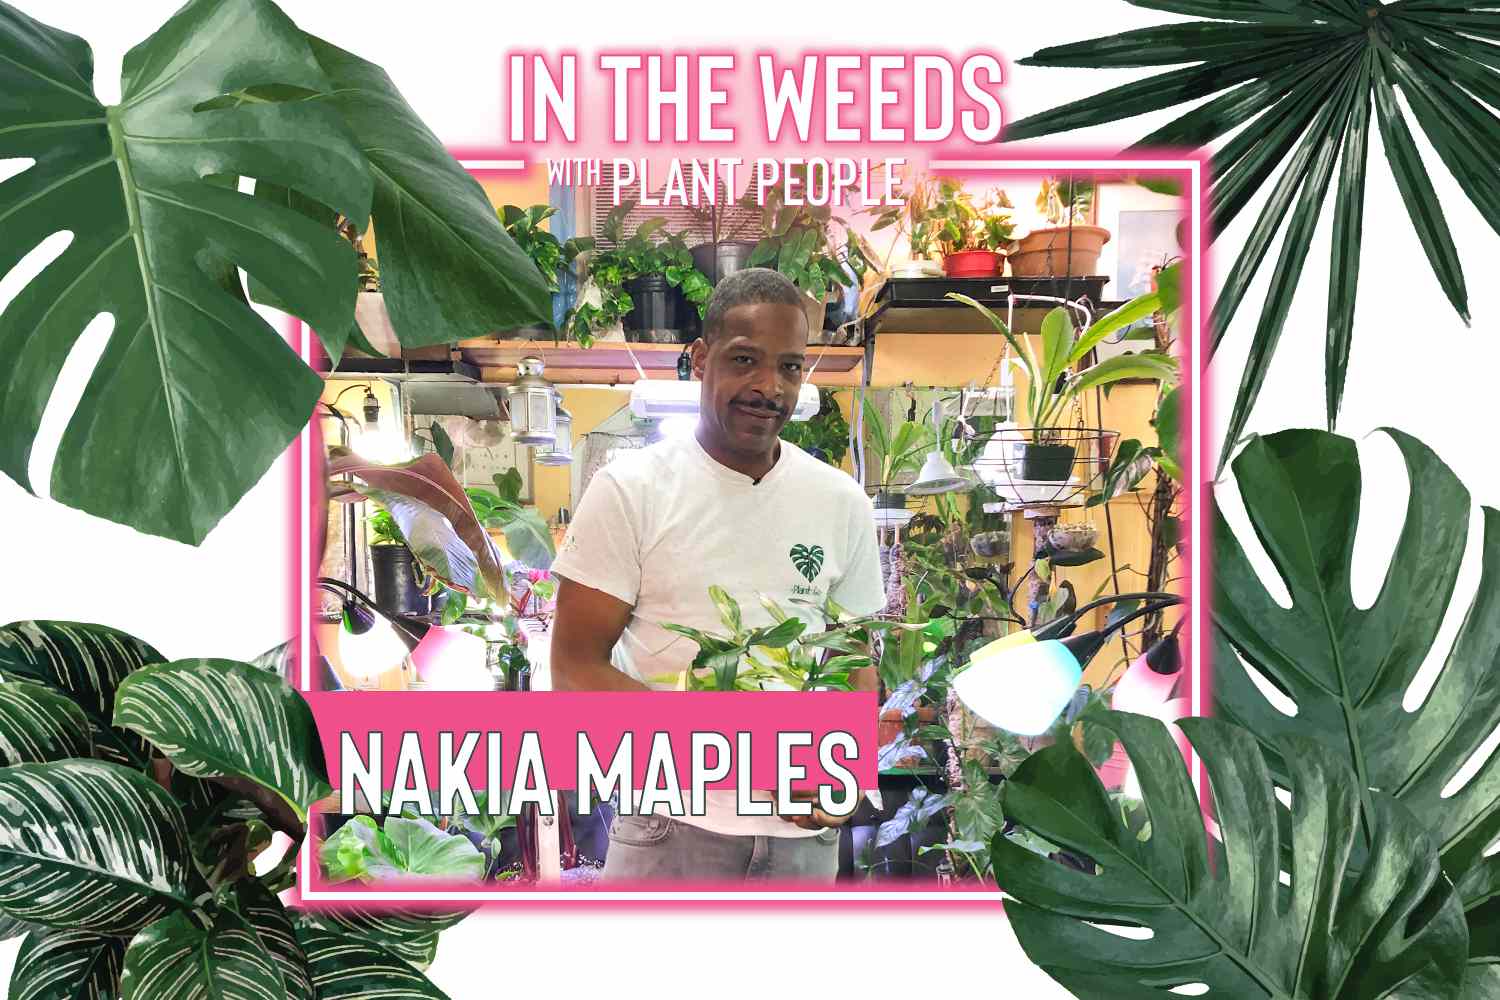 The Plant Guy Nakia Maples for In the Weeds With Plant People Episode 7